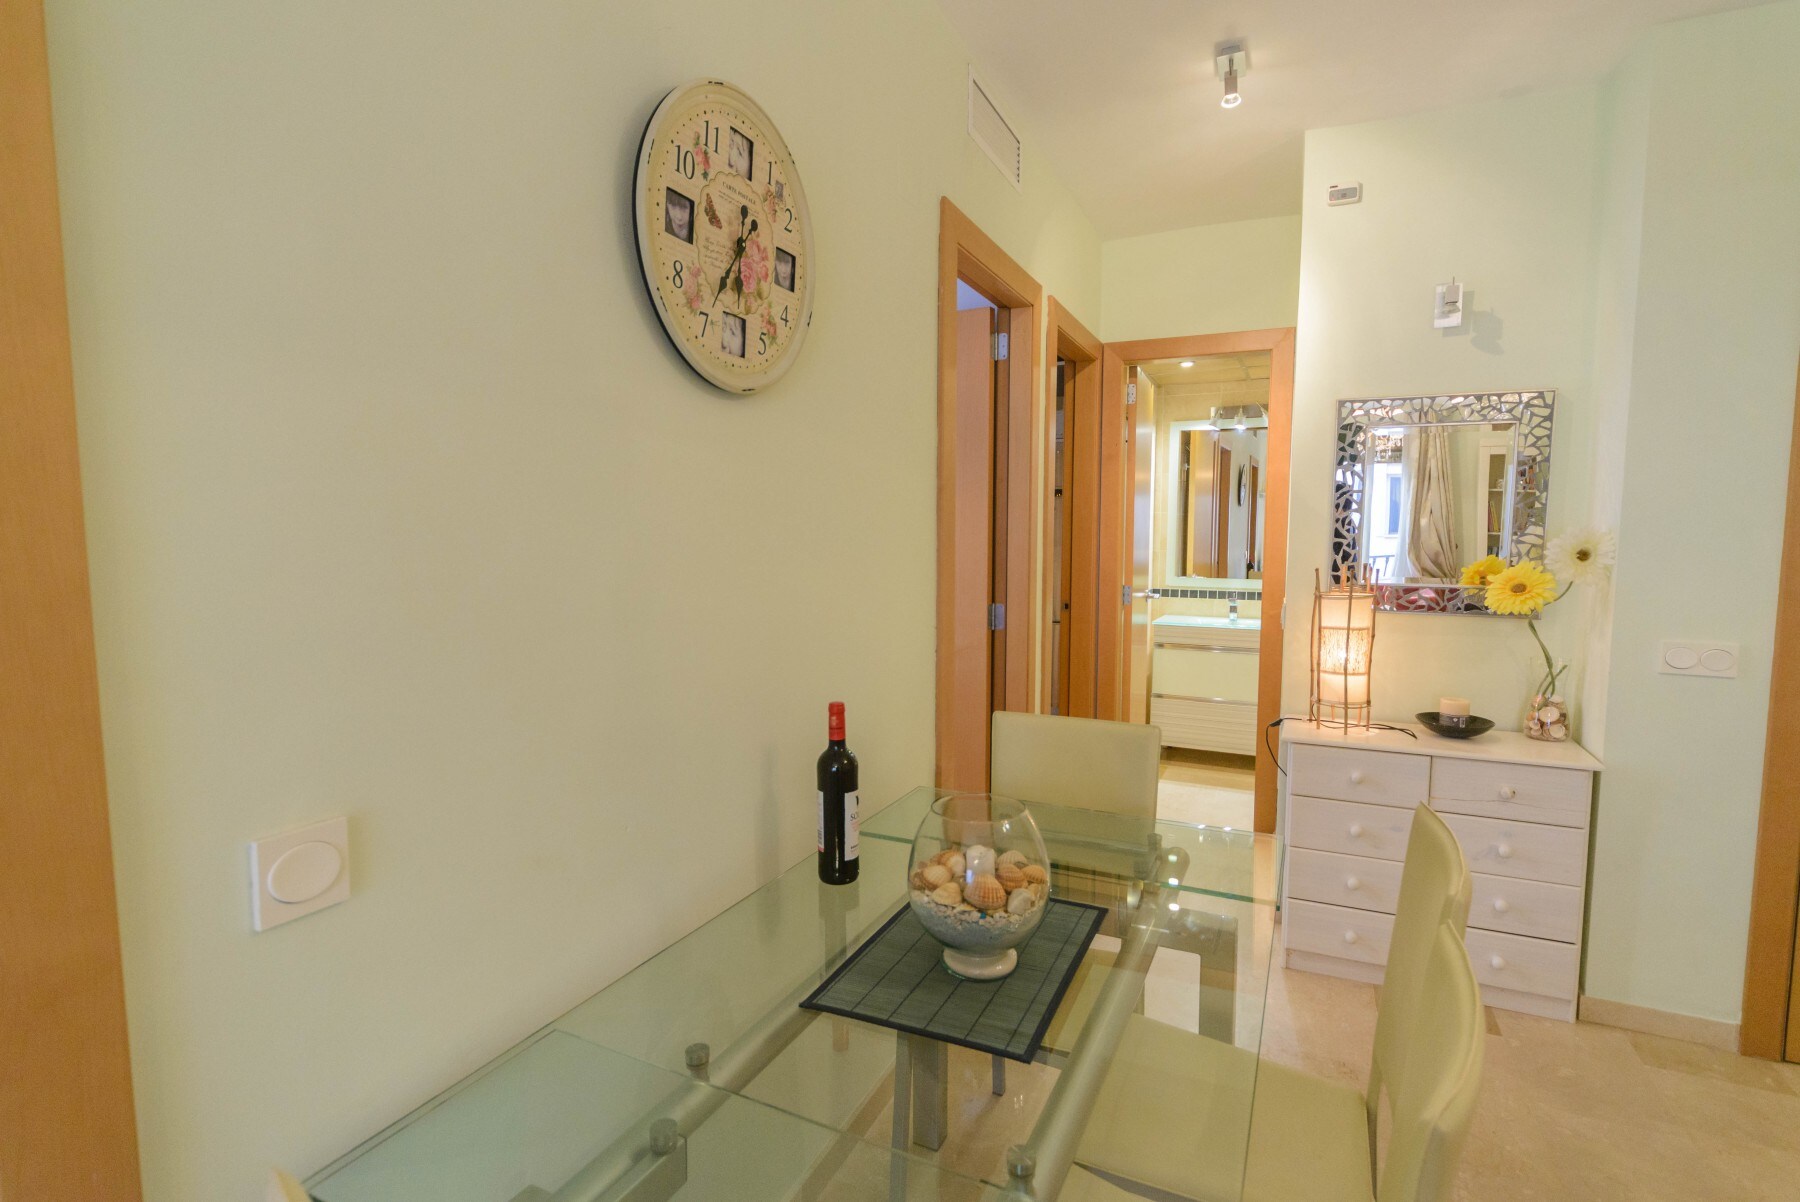 Enjoy the living room of this apartment in Fuengirola